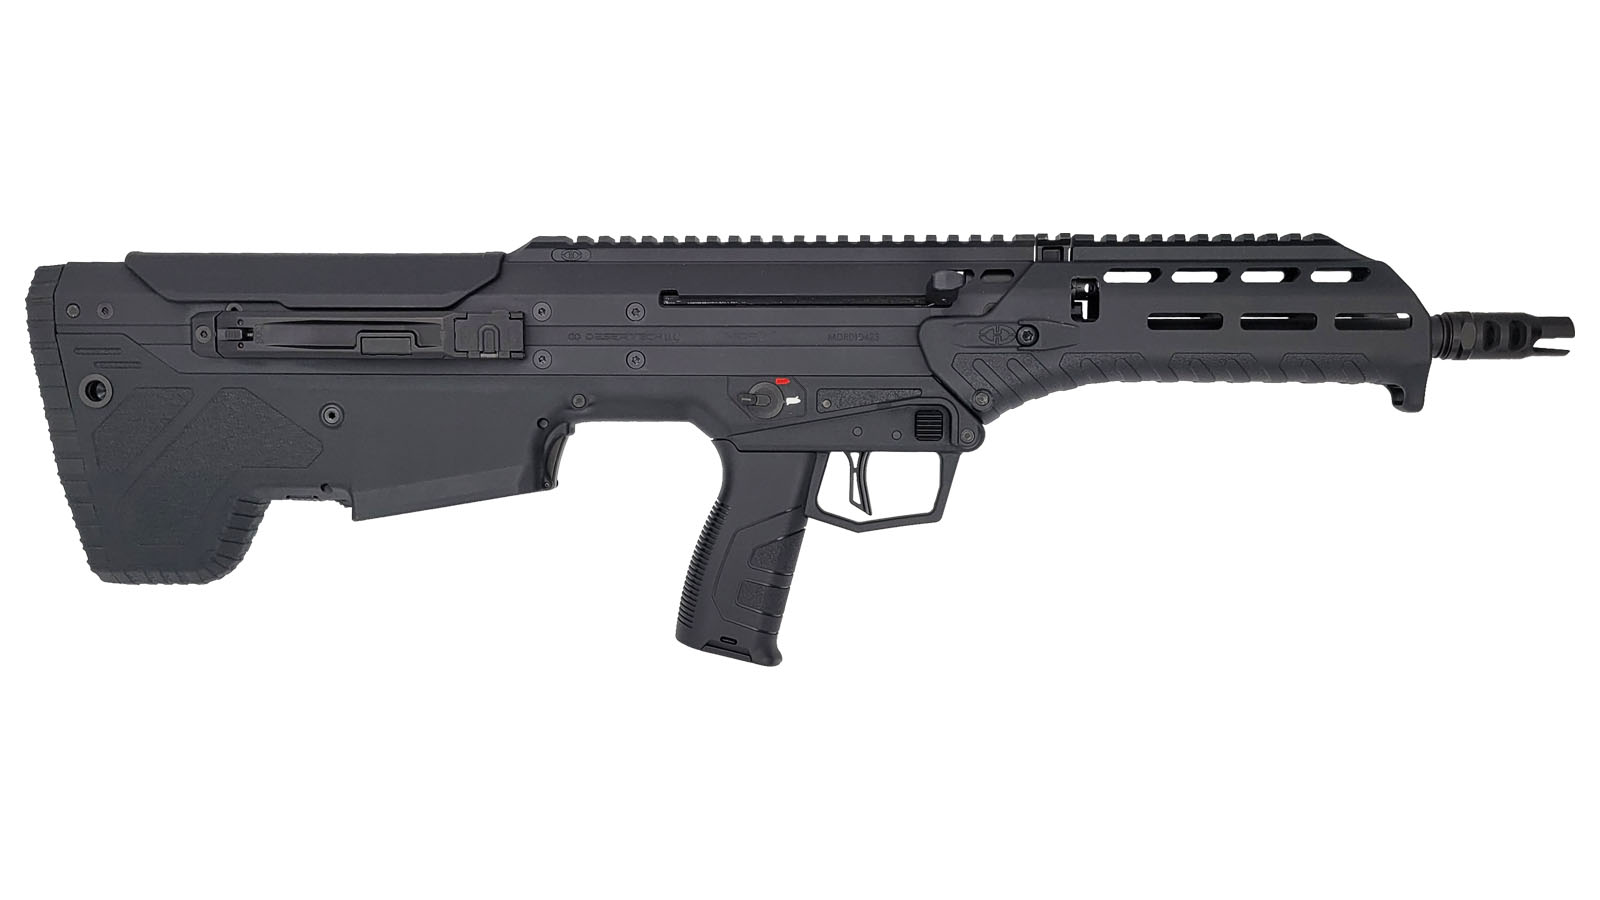 MDRx Rifle, 762NATO 308Win 16" 20rd Forward-Ejection BLK